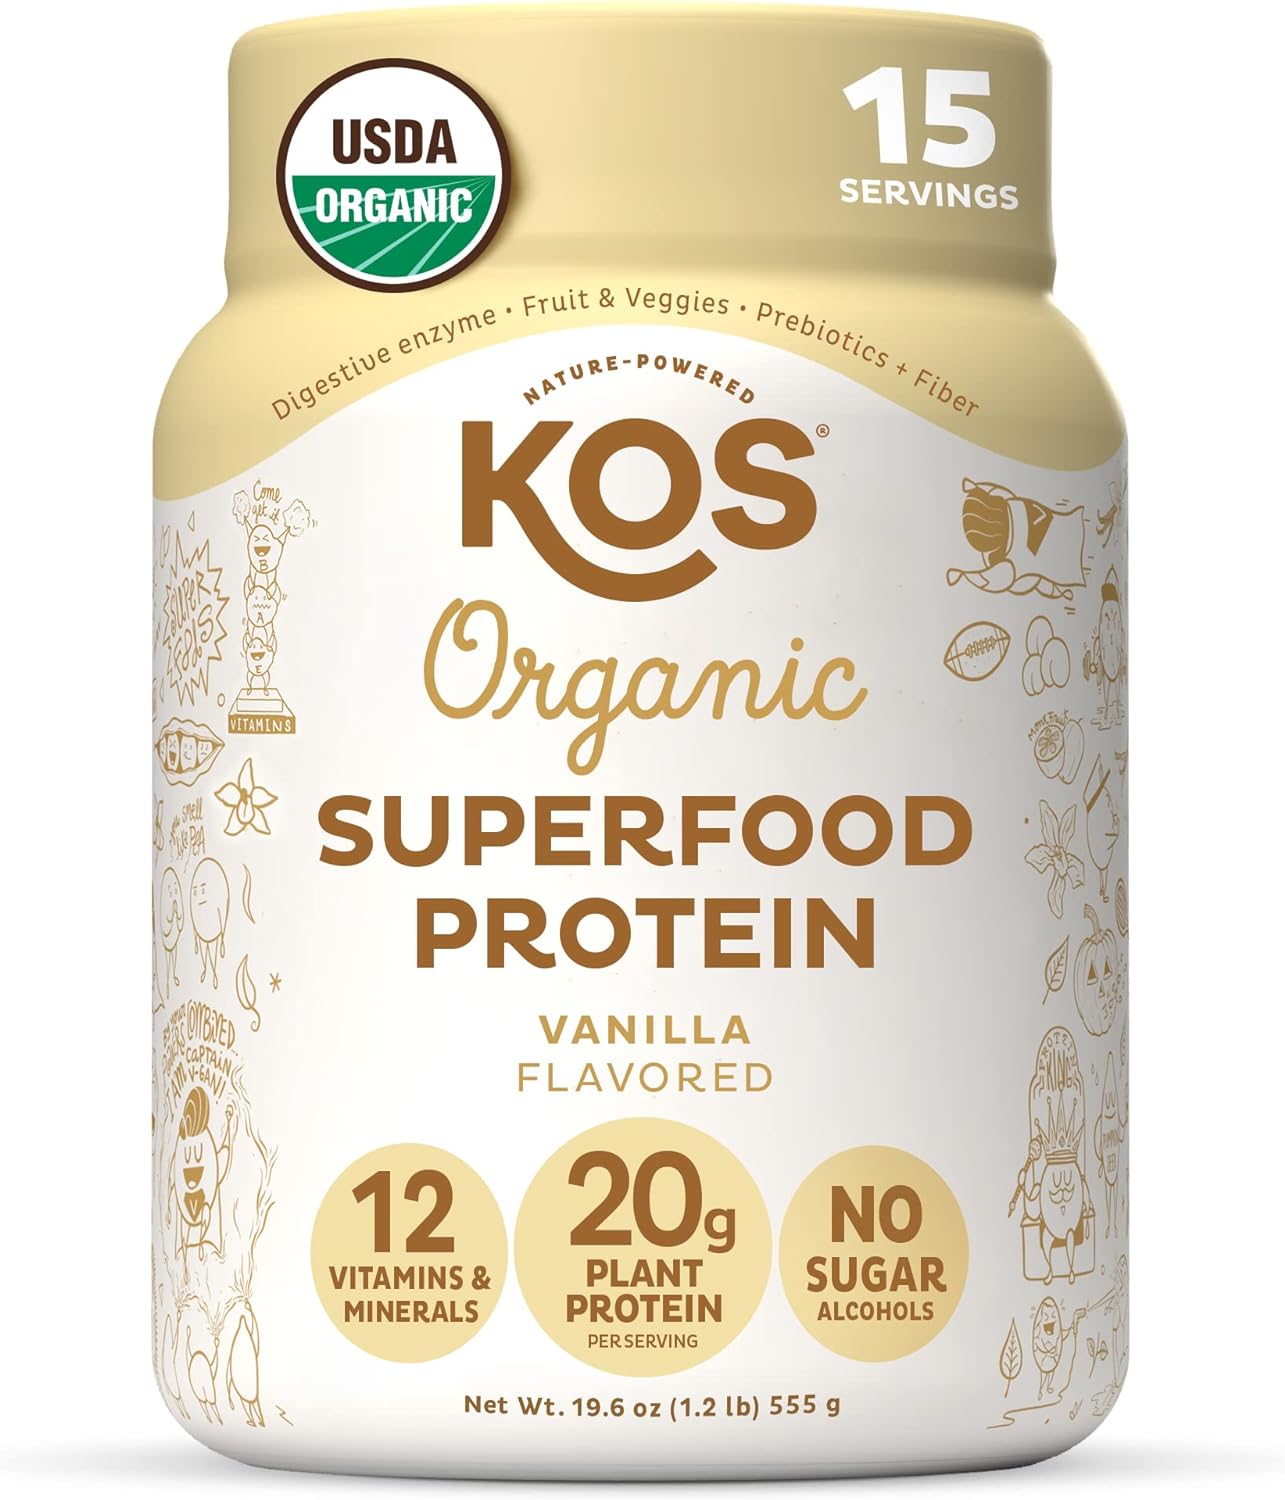 KOS Vegan Protein Powder Erythritol Free, Vanilla - USDA Organic Pea Protein Blend, Plant Based Superfood Rich in Vitamins & Minerals - Keto, Dairy Free - Meal Replacement for Women & Men, 15 Servings